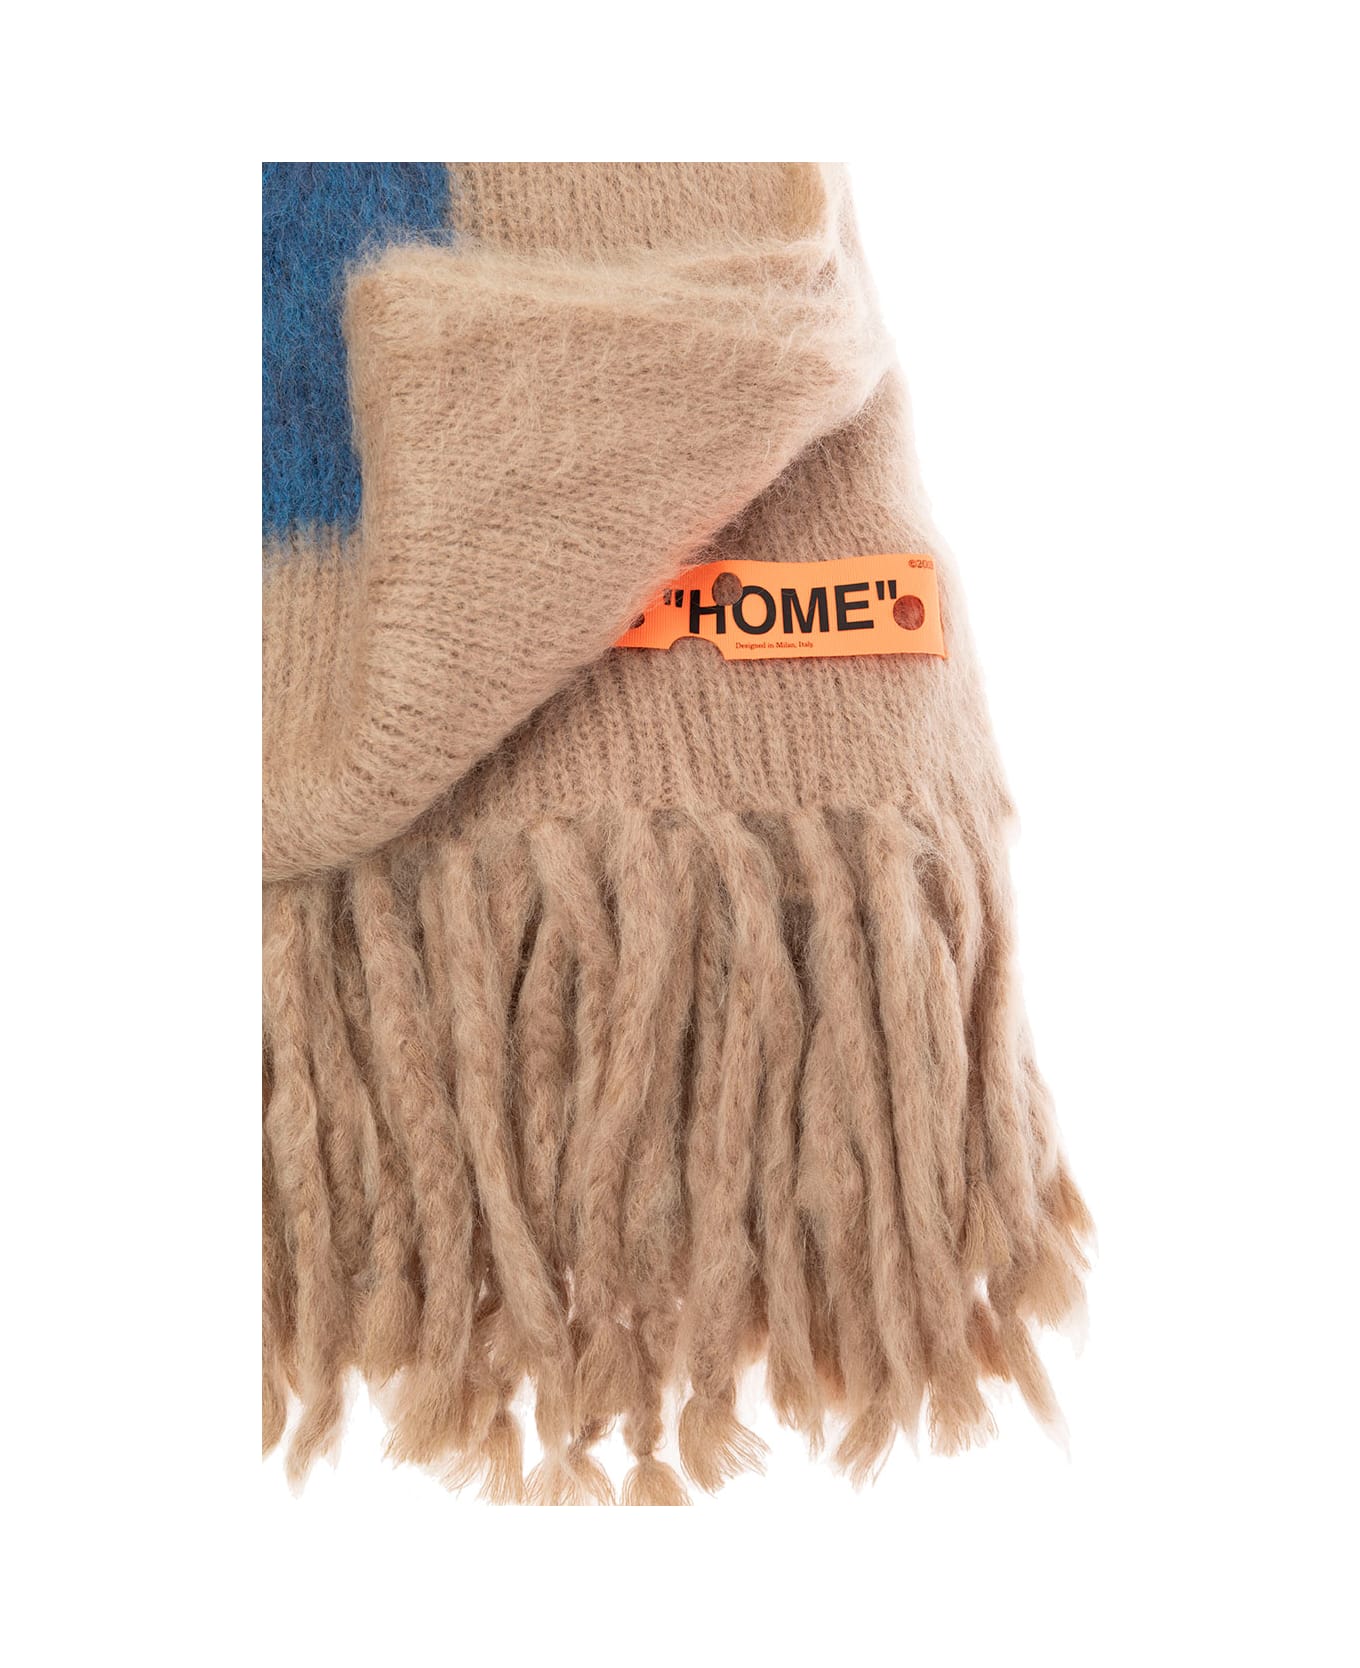 Off-White Beige Mohair Blanket With Arrow Print Off White Home - Beige